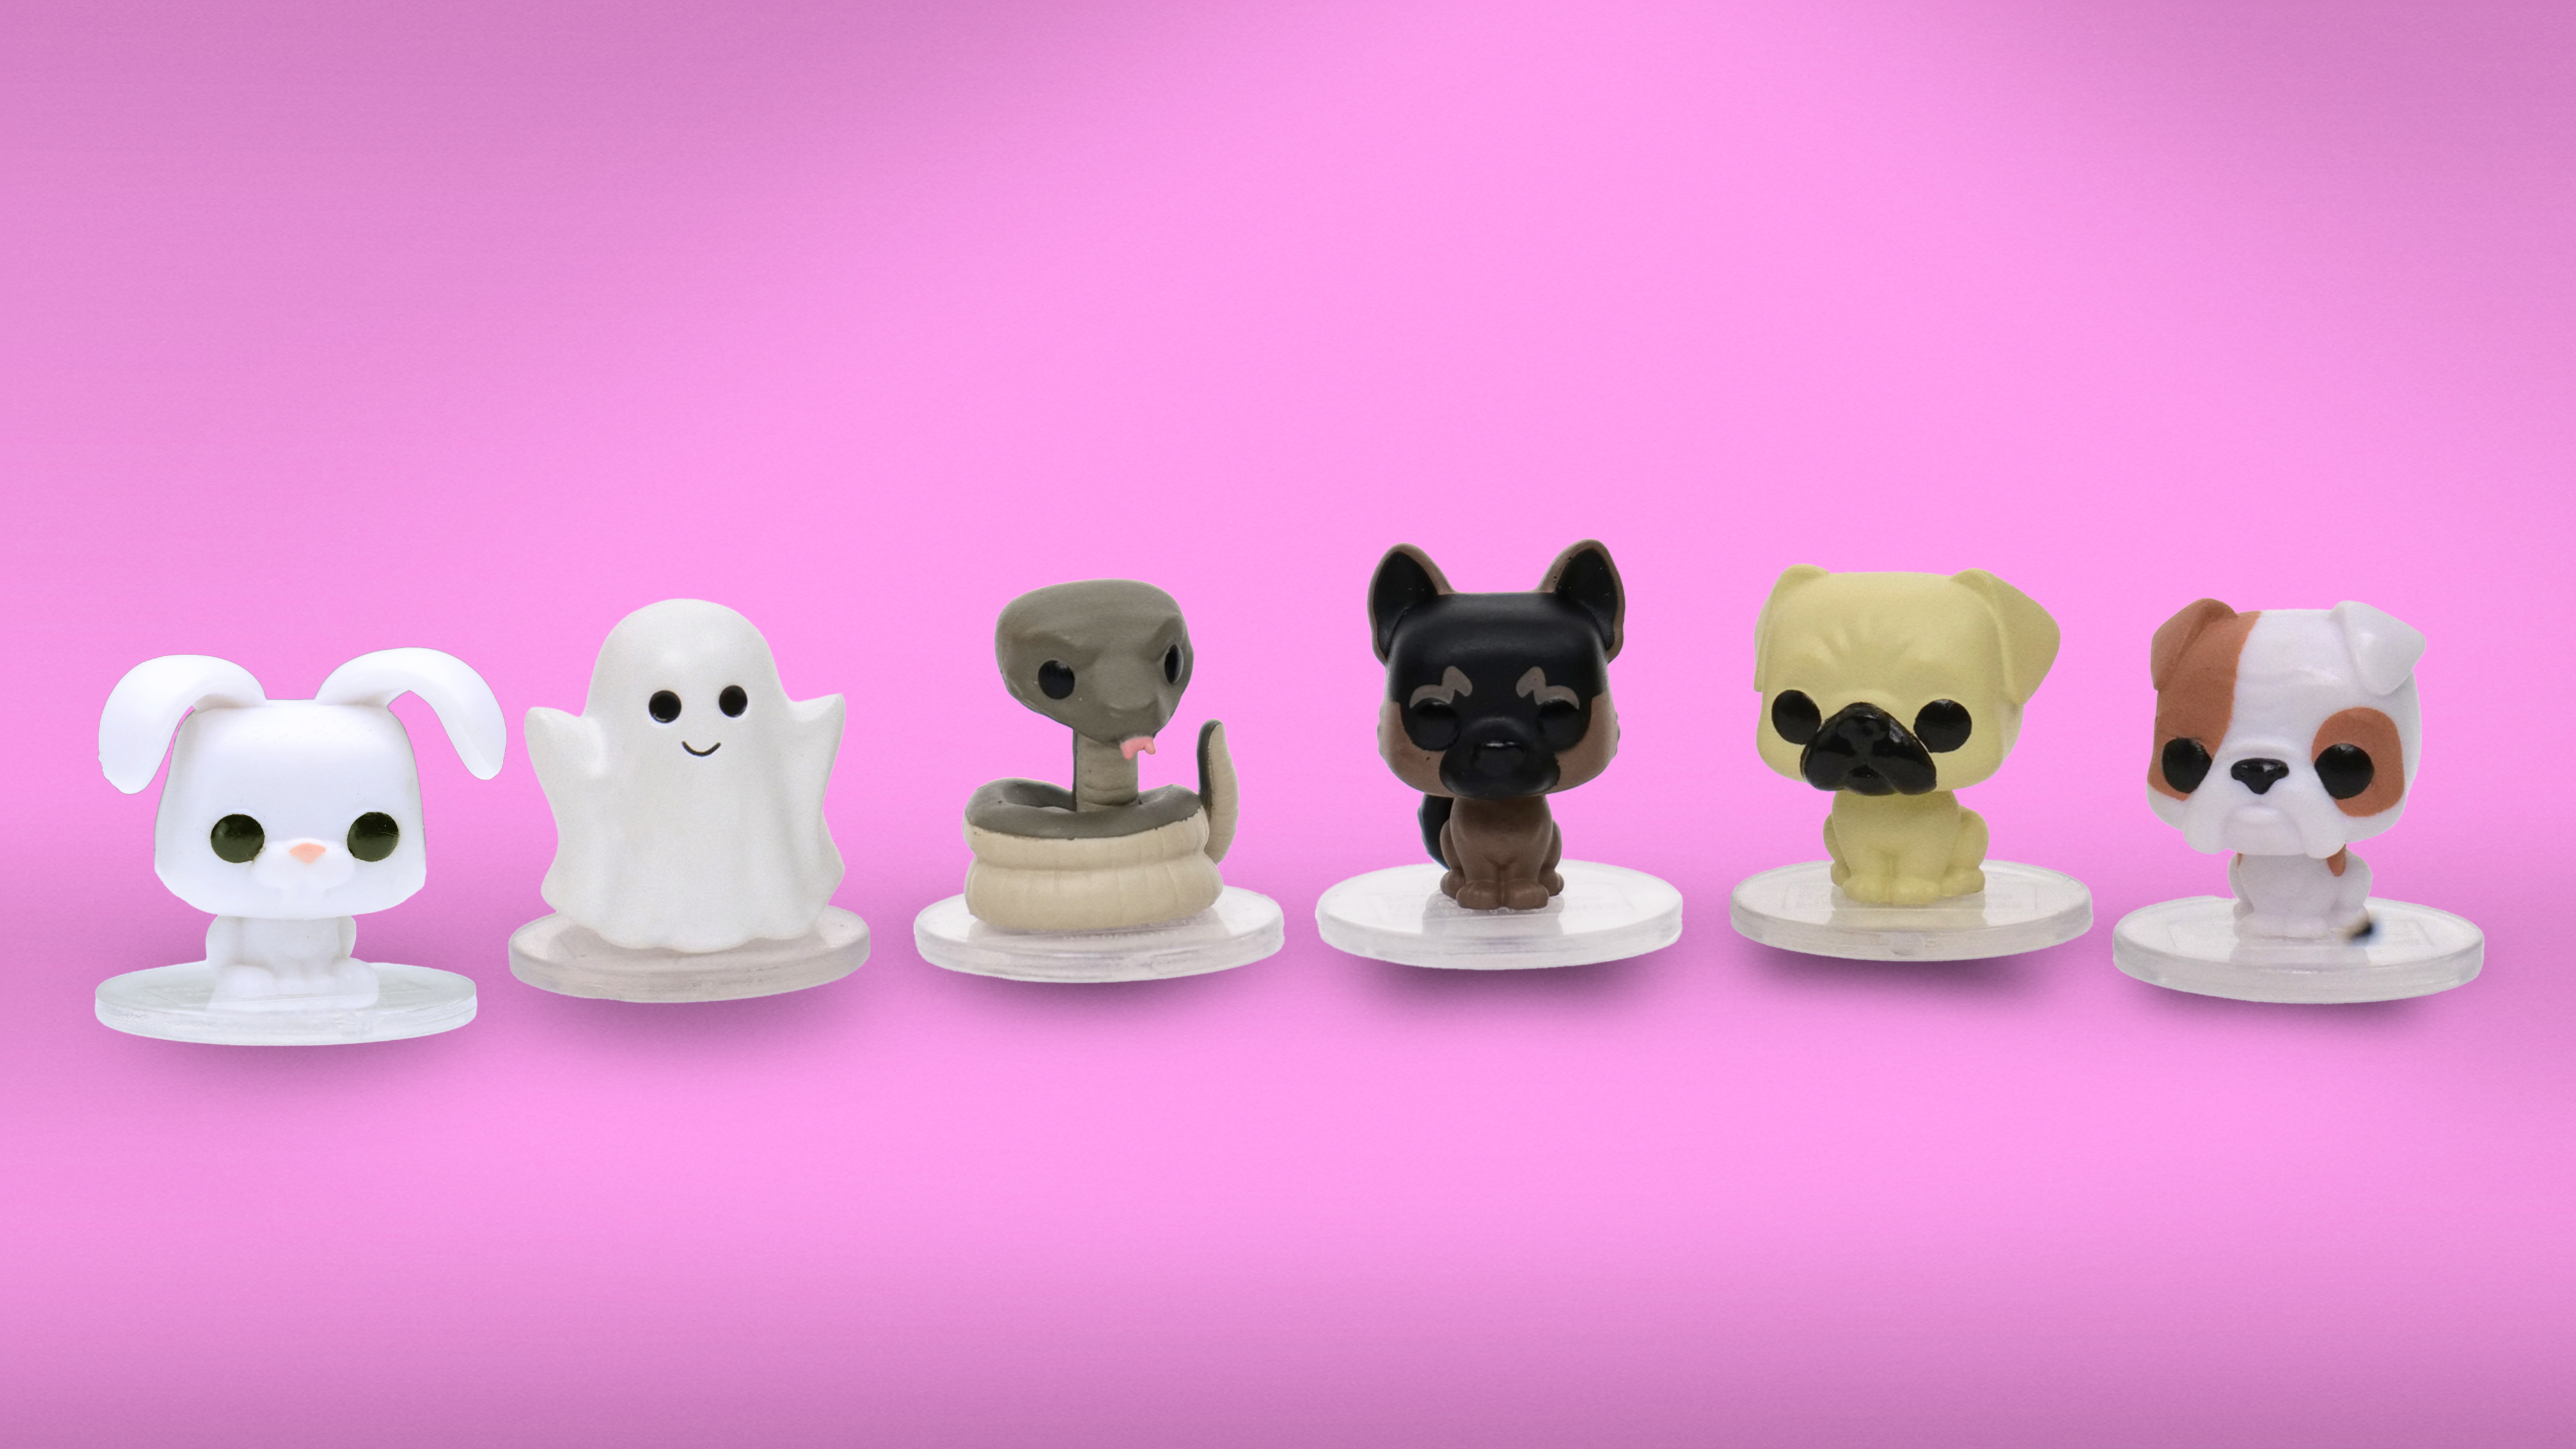 Six new Pop! Yourself Pets are lined up starting with Pop! Rabbit, Pop! Ghost, Pop! Snake, Pop! German Shephard, Pop! Pug, and Pop! Bulldog.